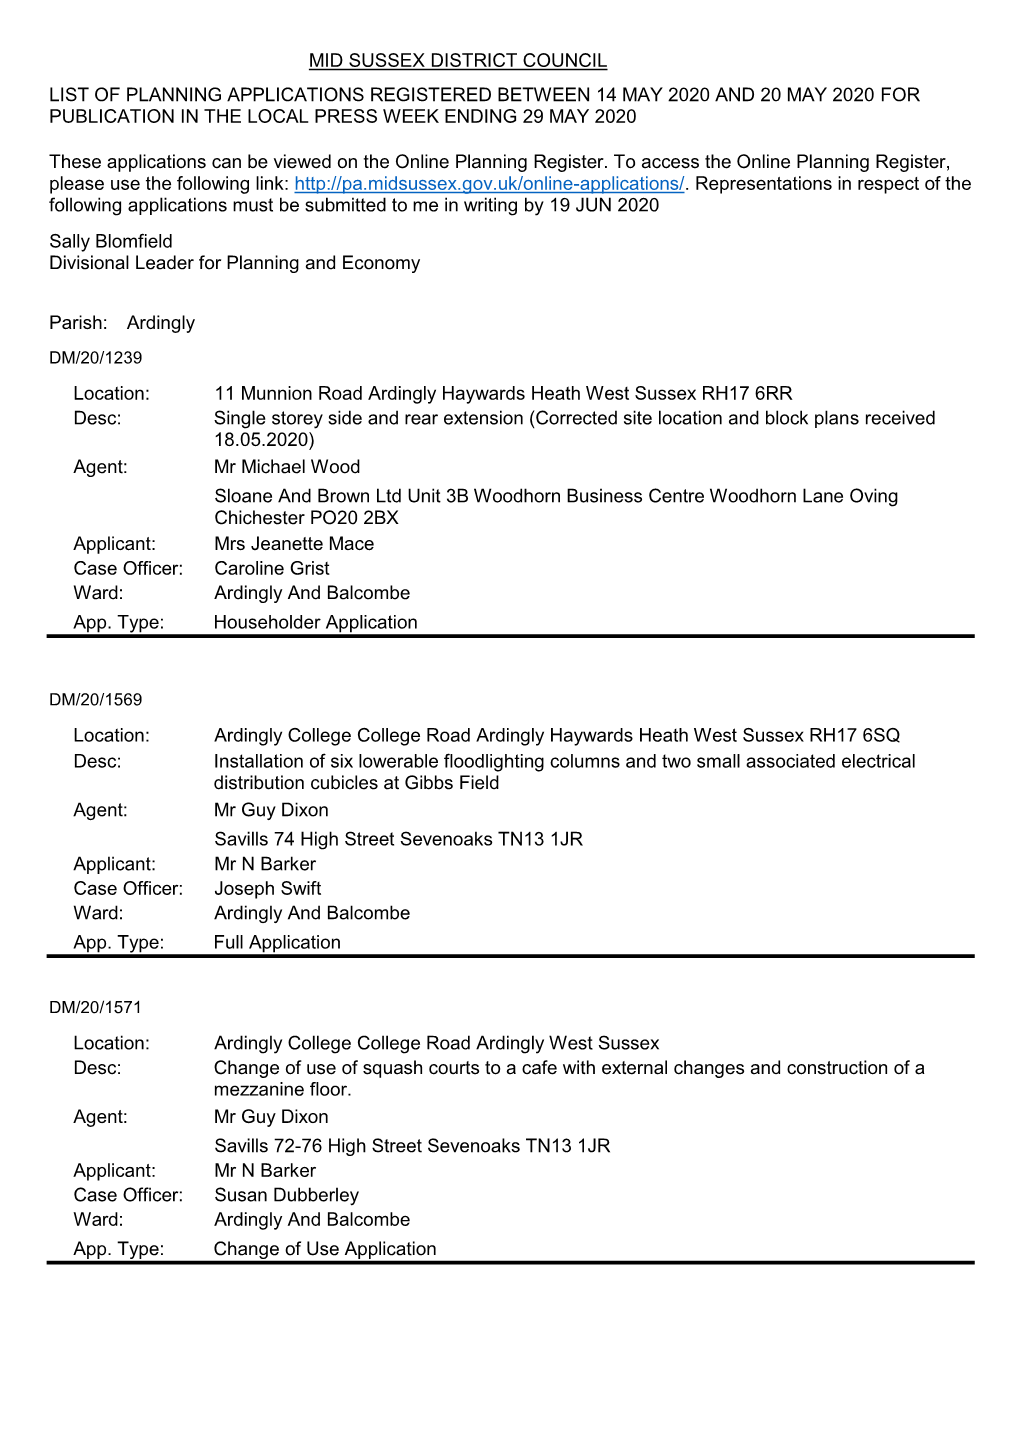 Mid Sussex District Council List of Planning Applications Registered Between 14 May 2020 and 20 May 2020 for Publication in the Local Press Week Ending 29 May 2020